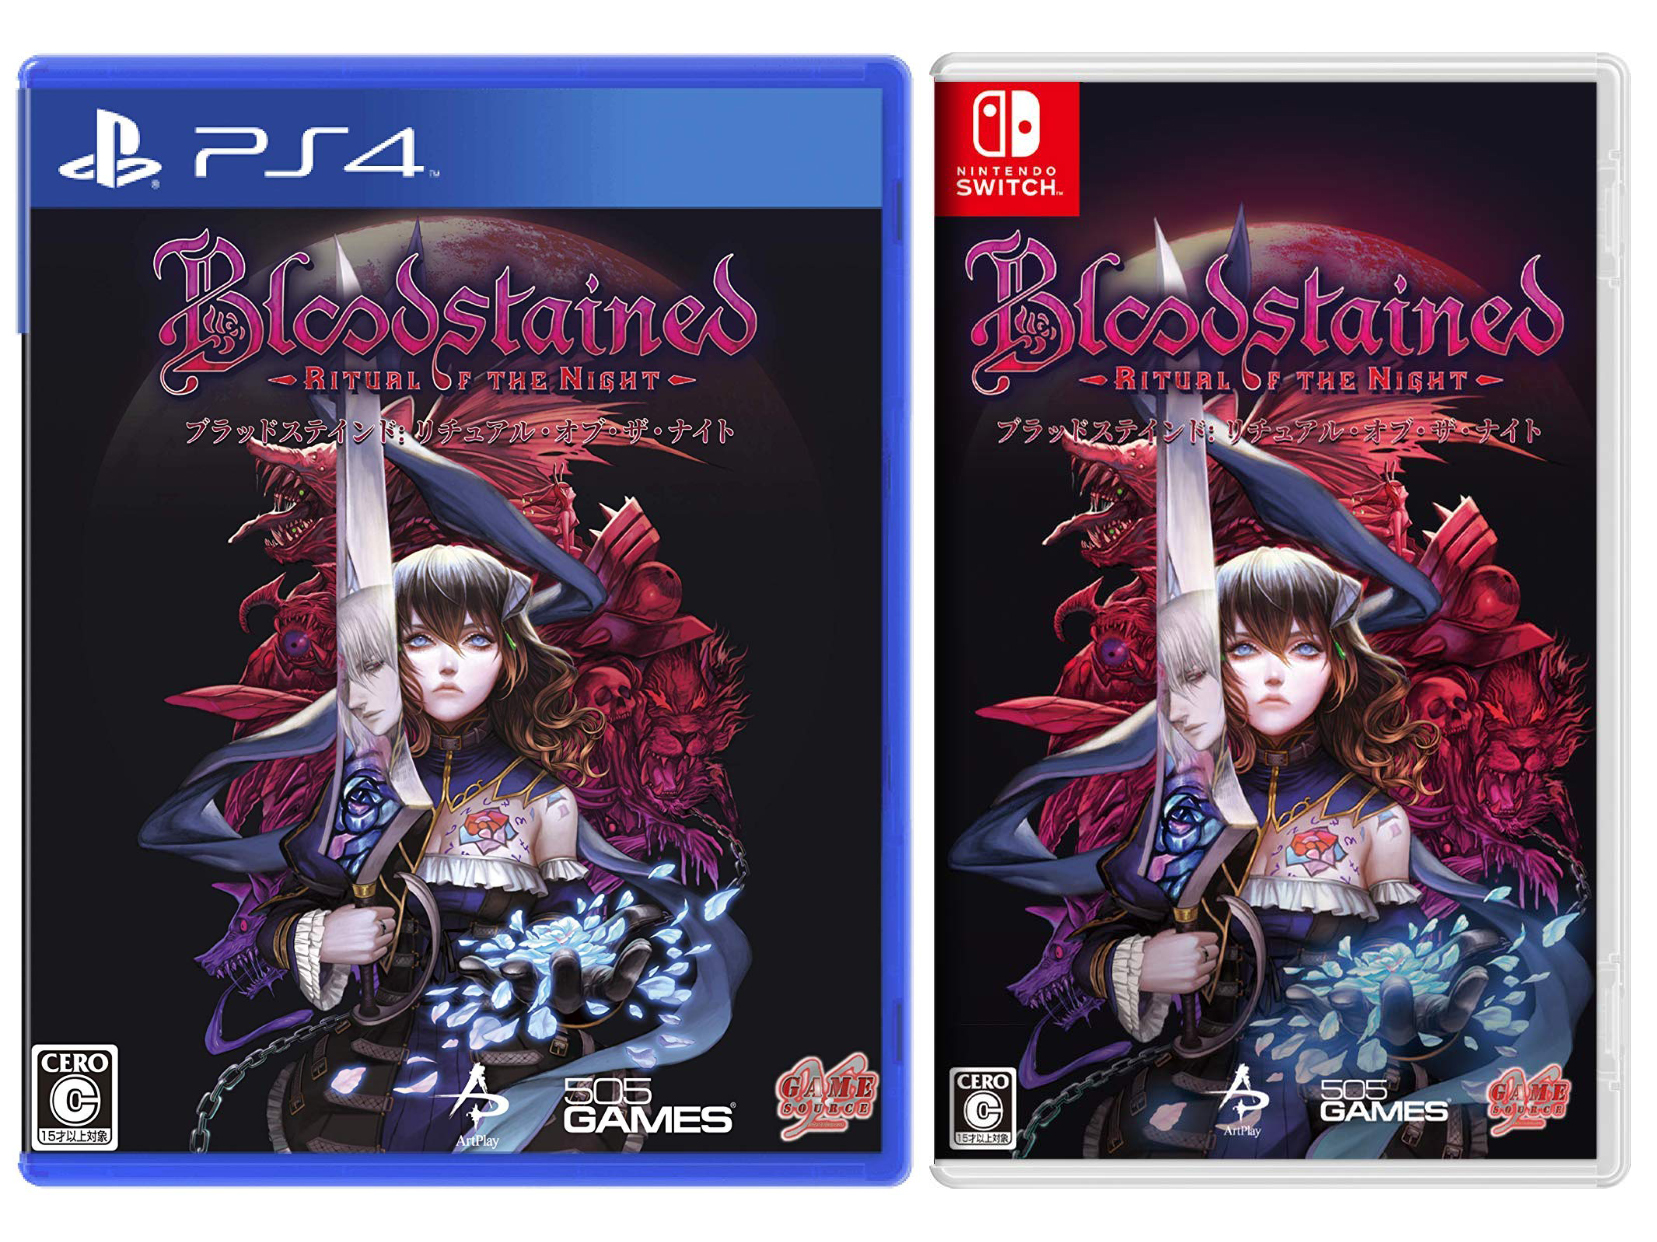 - Game Source Entertainment - 発売元 | Bloodstained: Ritual of the Night（ブラッドステインド: リチュアル・オブ・ザ・ナイト）